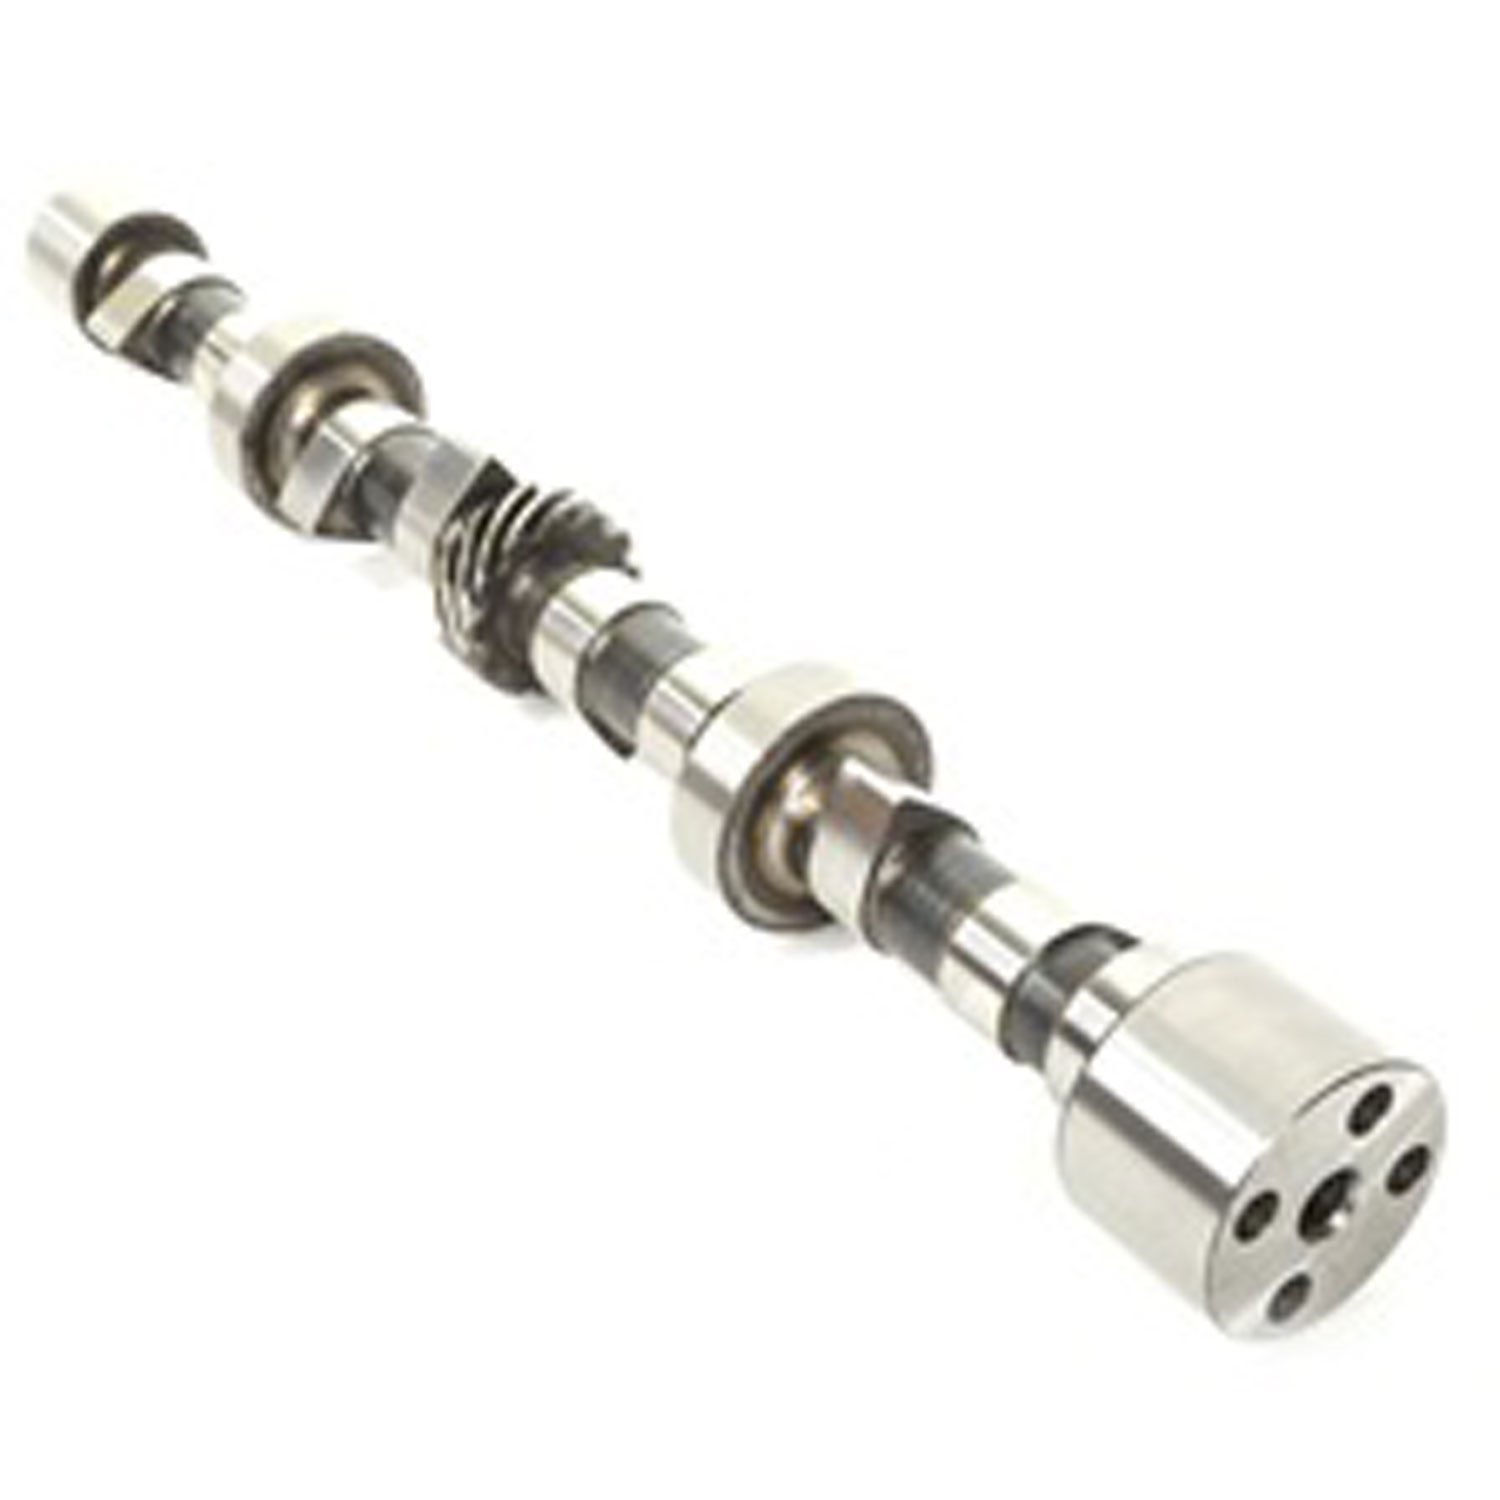 This chain-driven camshaft from Omix-ADA fits the 134 cubic inch L-head engine used in 41-45 Ford GP